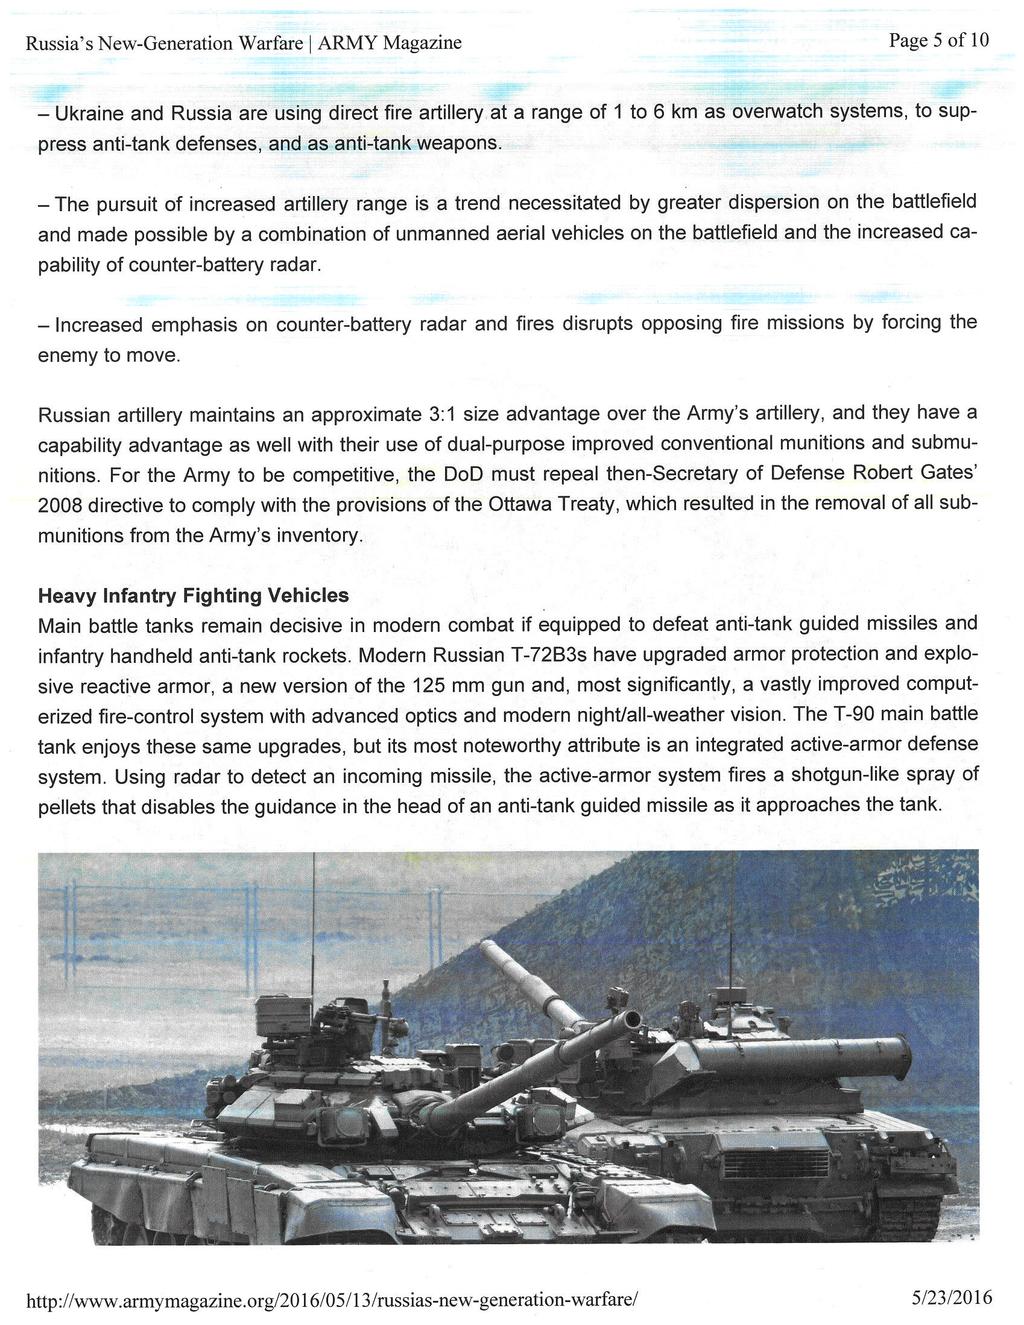 Page 5 of 10 Russia's New-Generation Warfare A R M Y Magazine a- - Ukraine and Russia are using direct fire artillery at a range of 1 to 6 km as ovenatatch systems, to suppress anti-tank defenses,